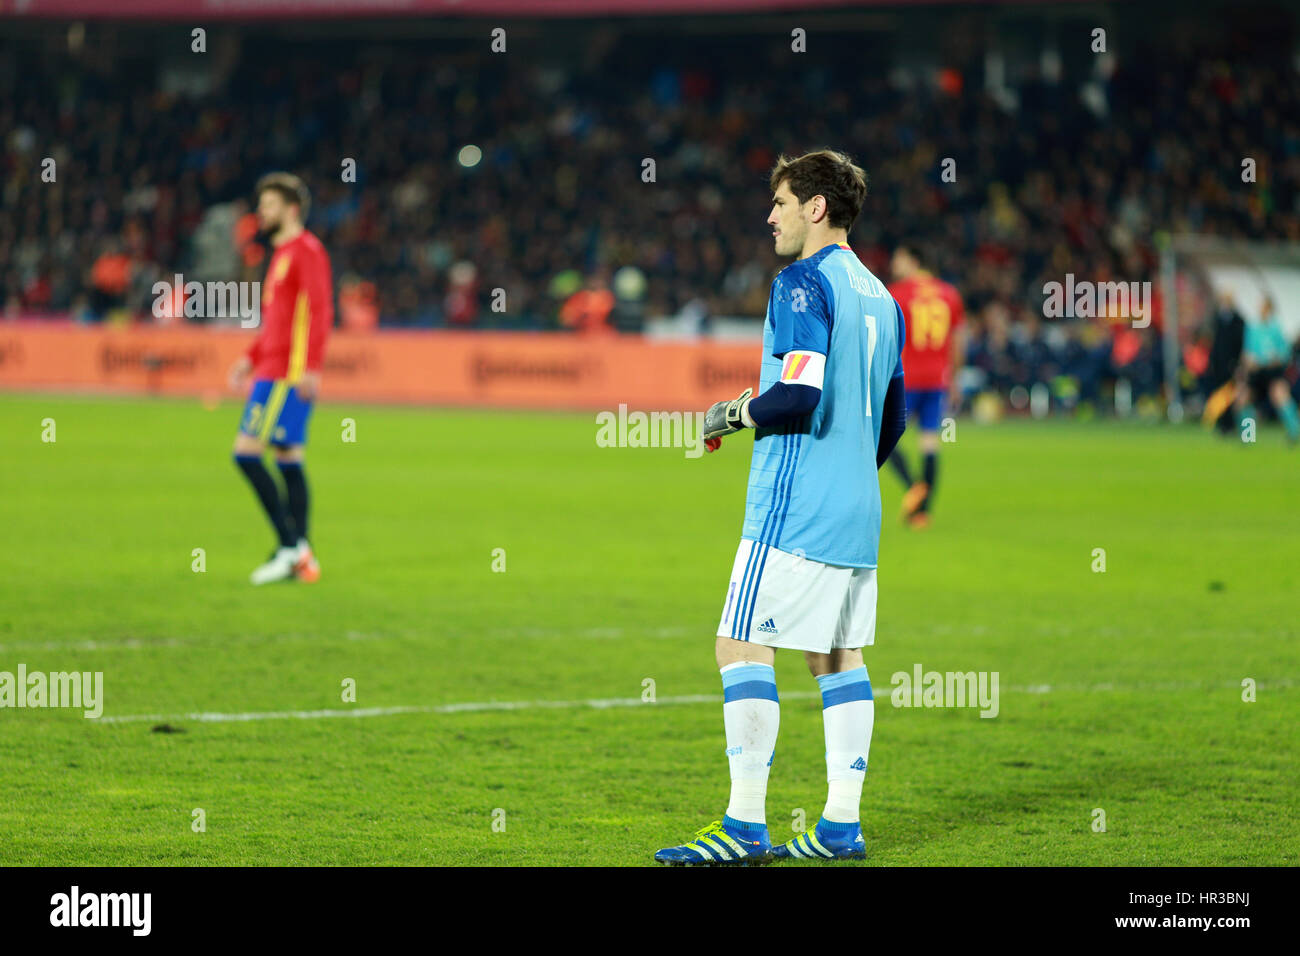 CLUJ-NAPOCA, ROMANIA - MARCH 27, 2016: Iker Casillas, the goalkeeper of the National Football Team of Spain playing against Romania in friendly match  Stock Photo